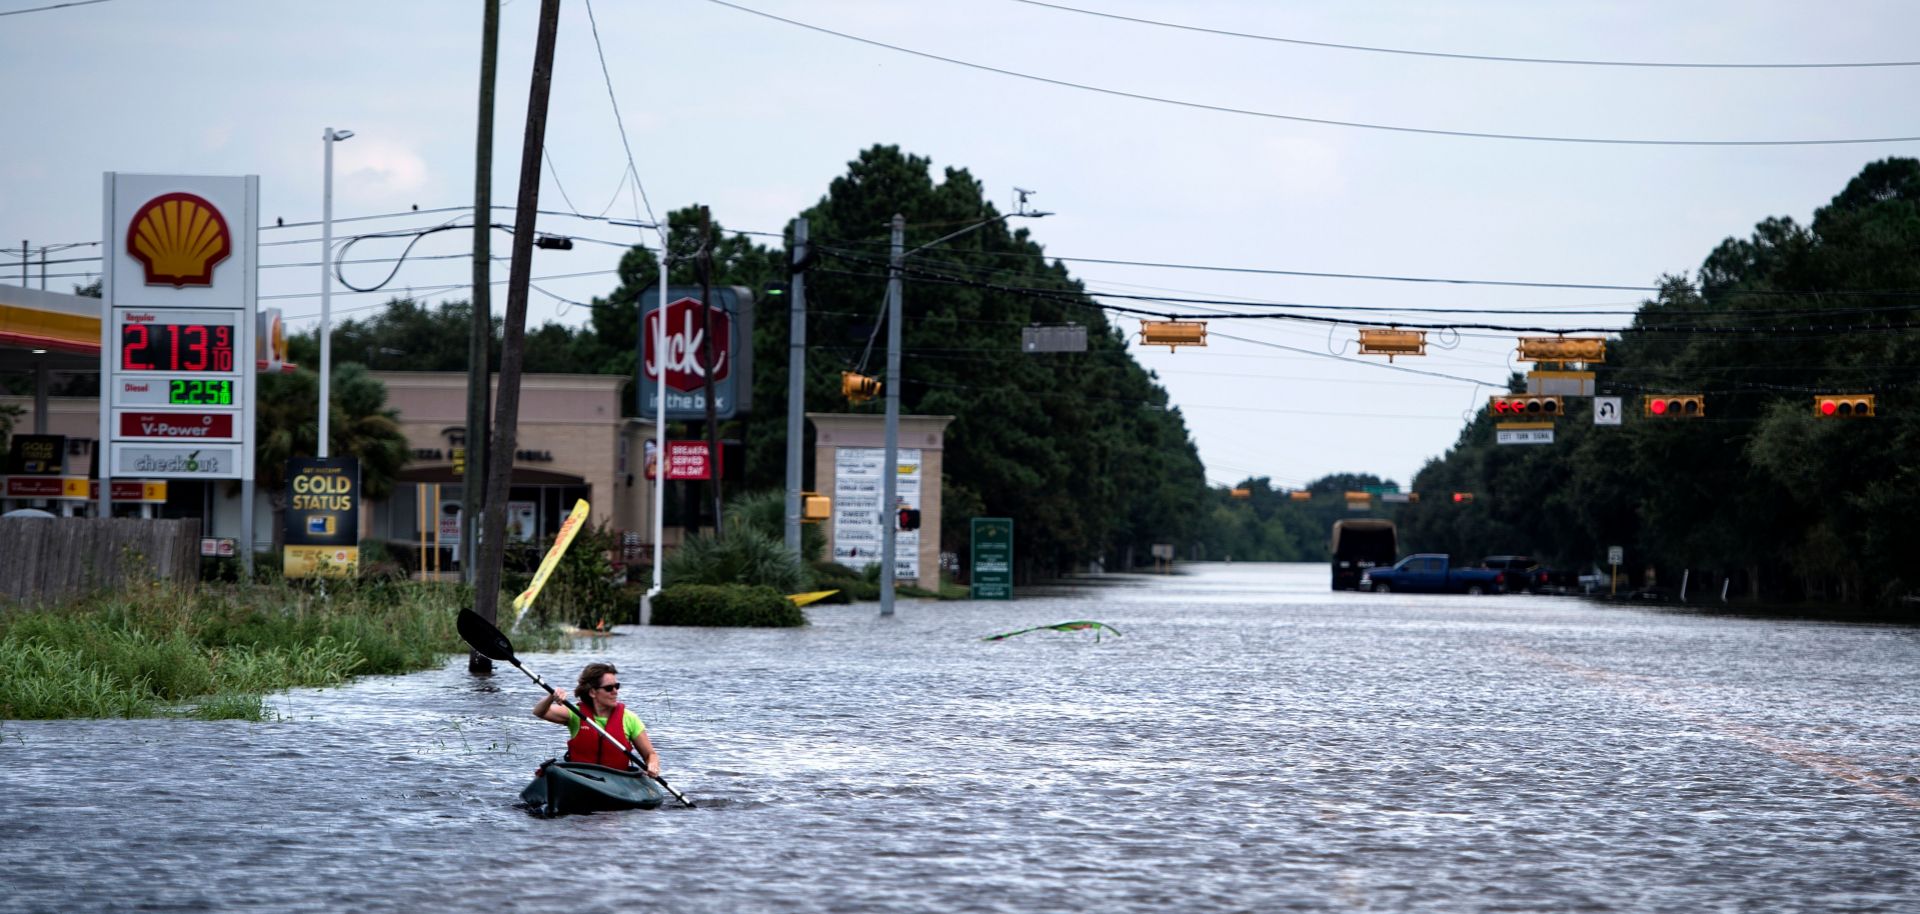 A woman in a kayak paddles down a Houston road flooded in late August by rains from Hurricane Harvey.